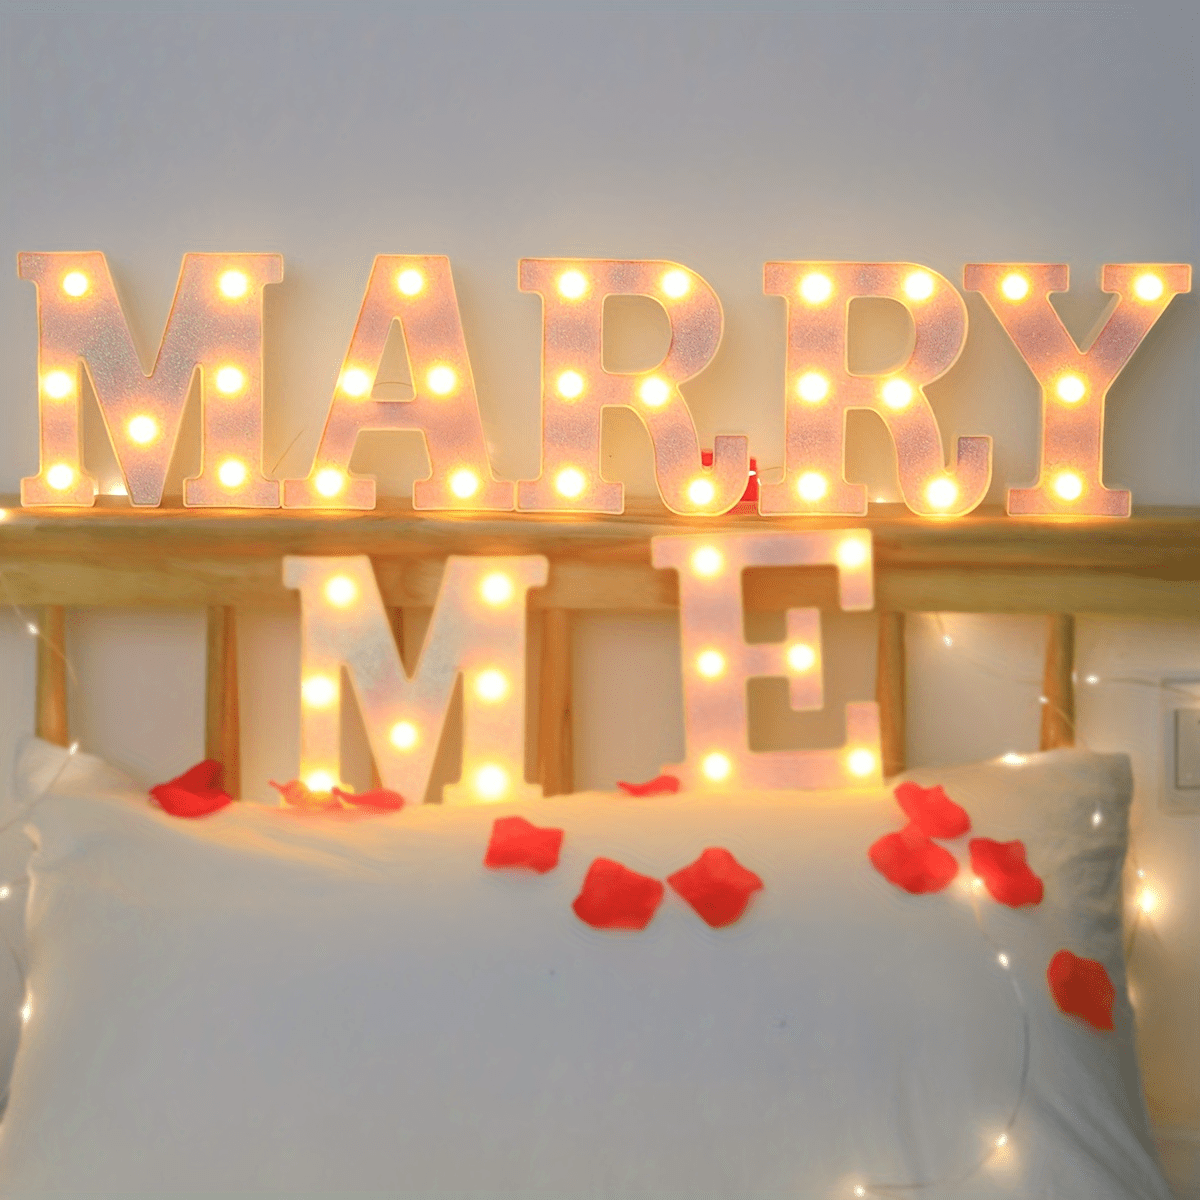 

1pc Lighting Glowing Letters Light, Led Battery Powered Letter Light, For Bedroom Birthday Party Wedding Home Christmas Decoration